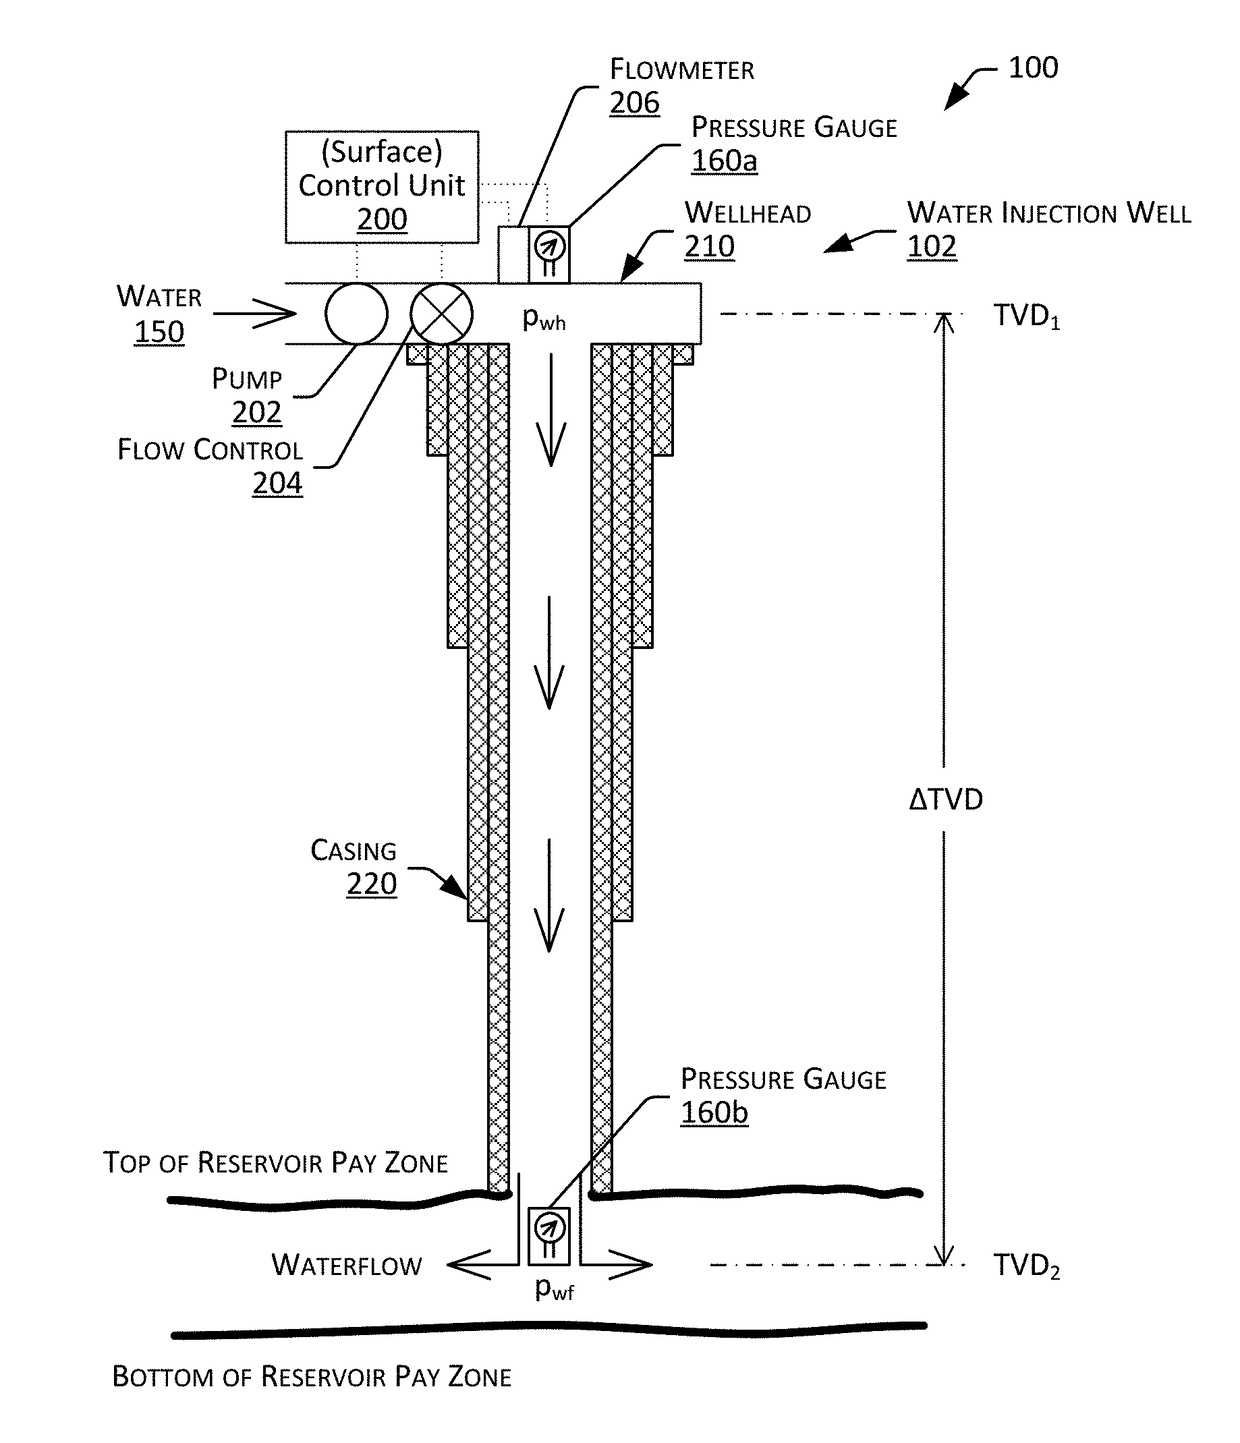 Systems and methods for transient-pressure testing of water injection wells to determine reservoir damages